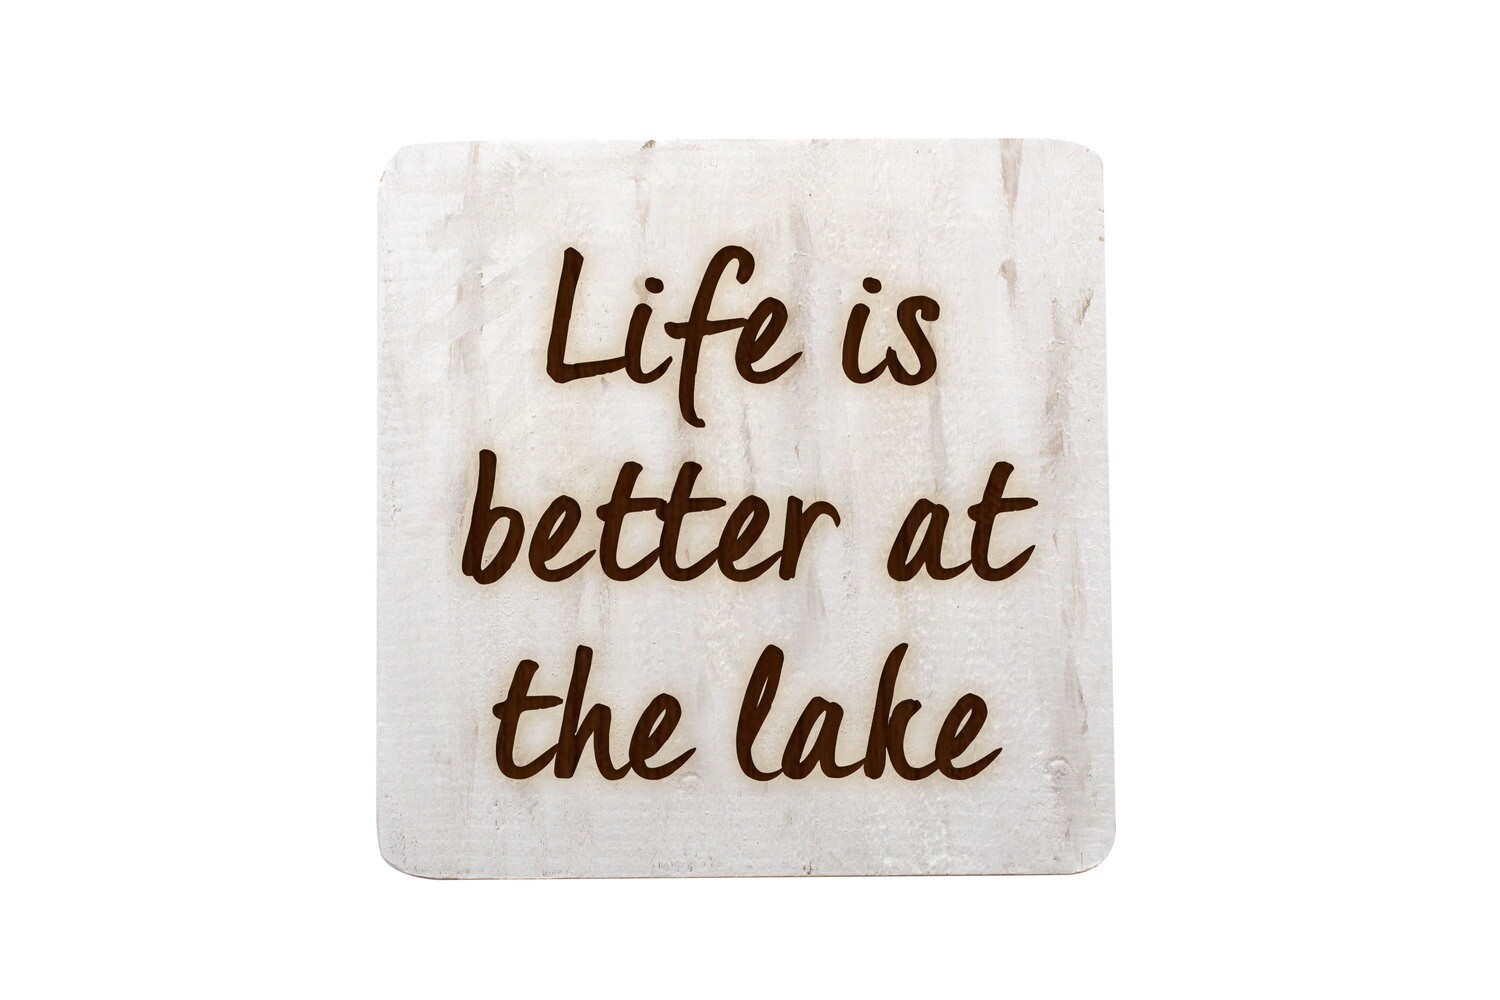 Life is Better at the Lake or Beach Hand-Painted Wood Coaster Set